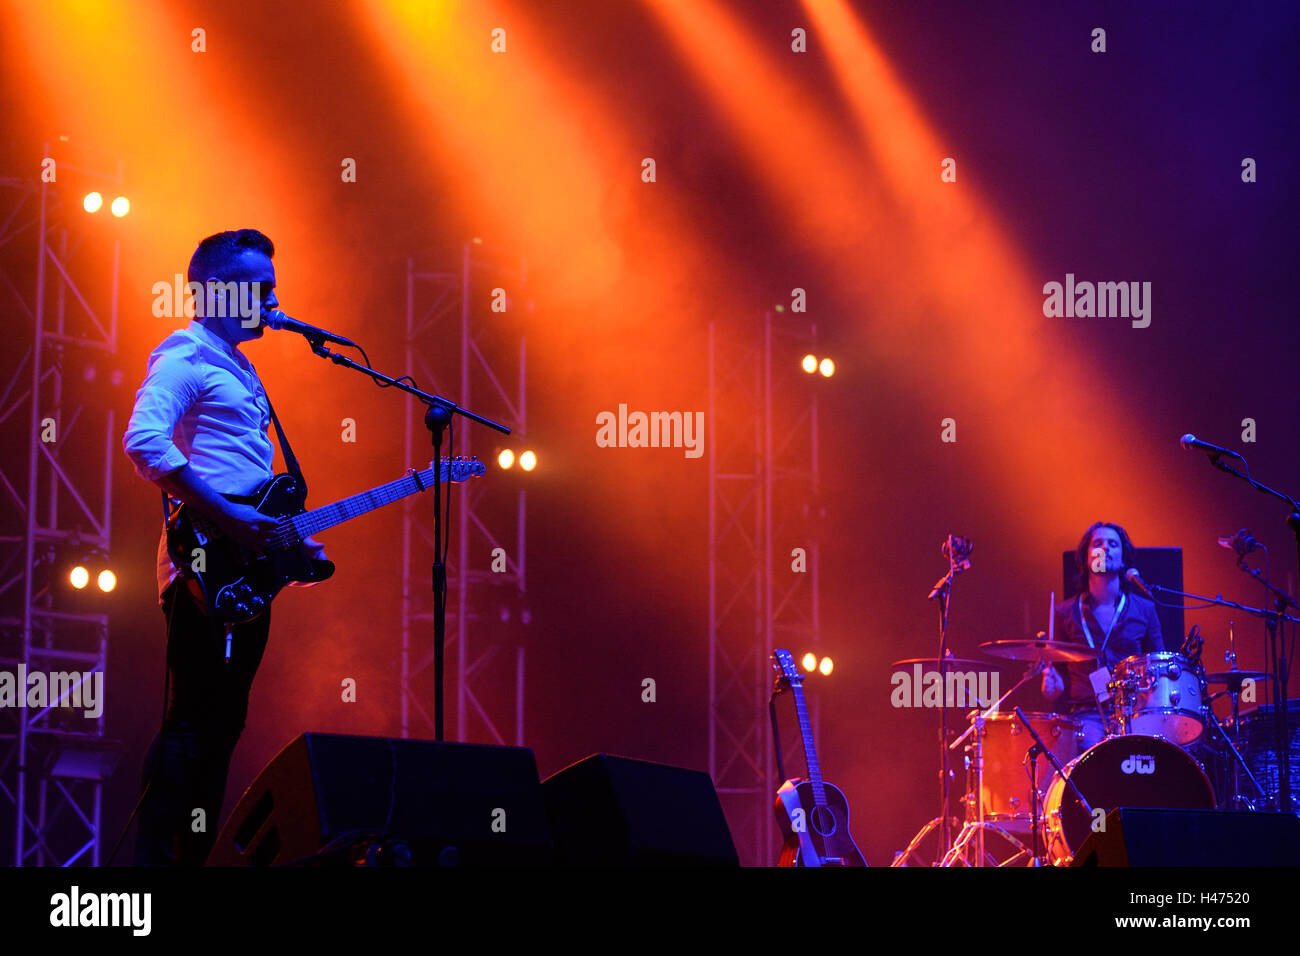 BILBAO, SPAIN - OCT 31: We Cut Corners (band) live performance at Bime Festival on October 31, 2014 in Bilbao, Spain. Stock Photo